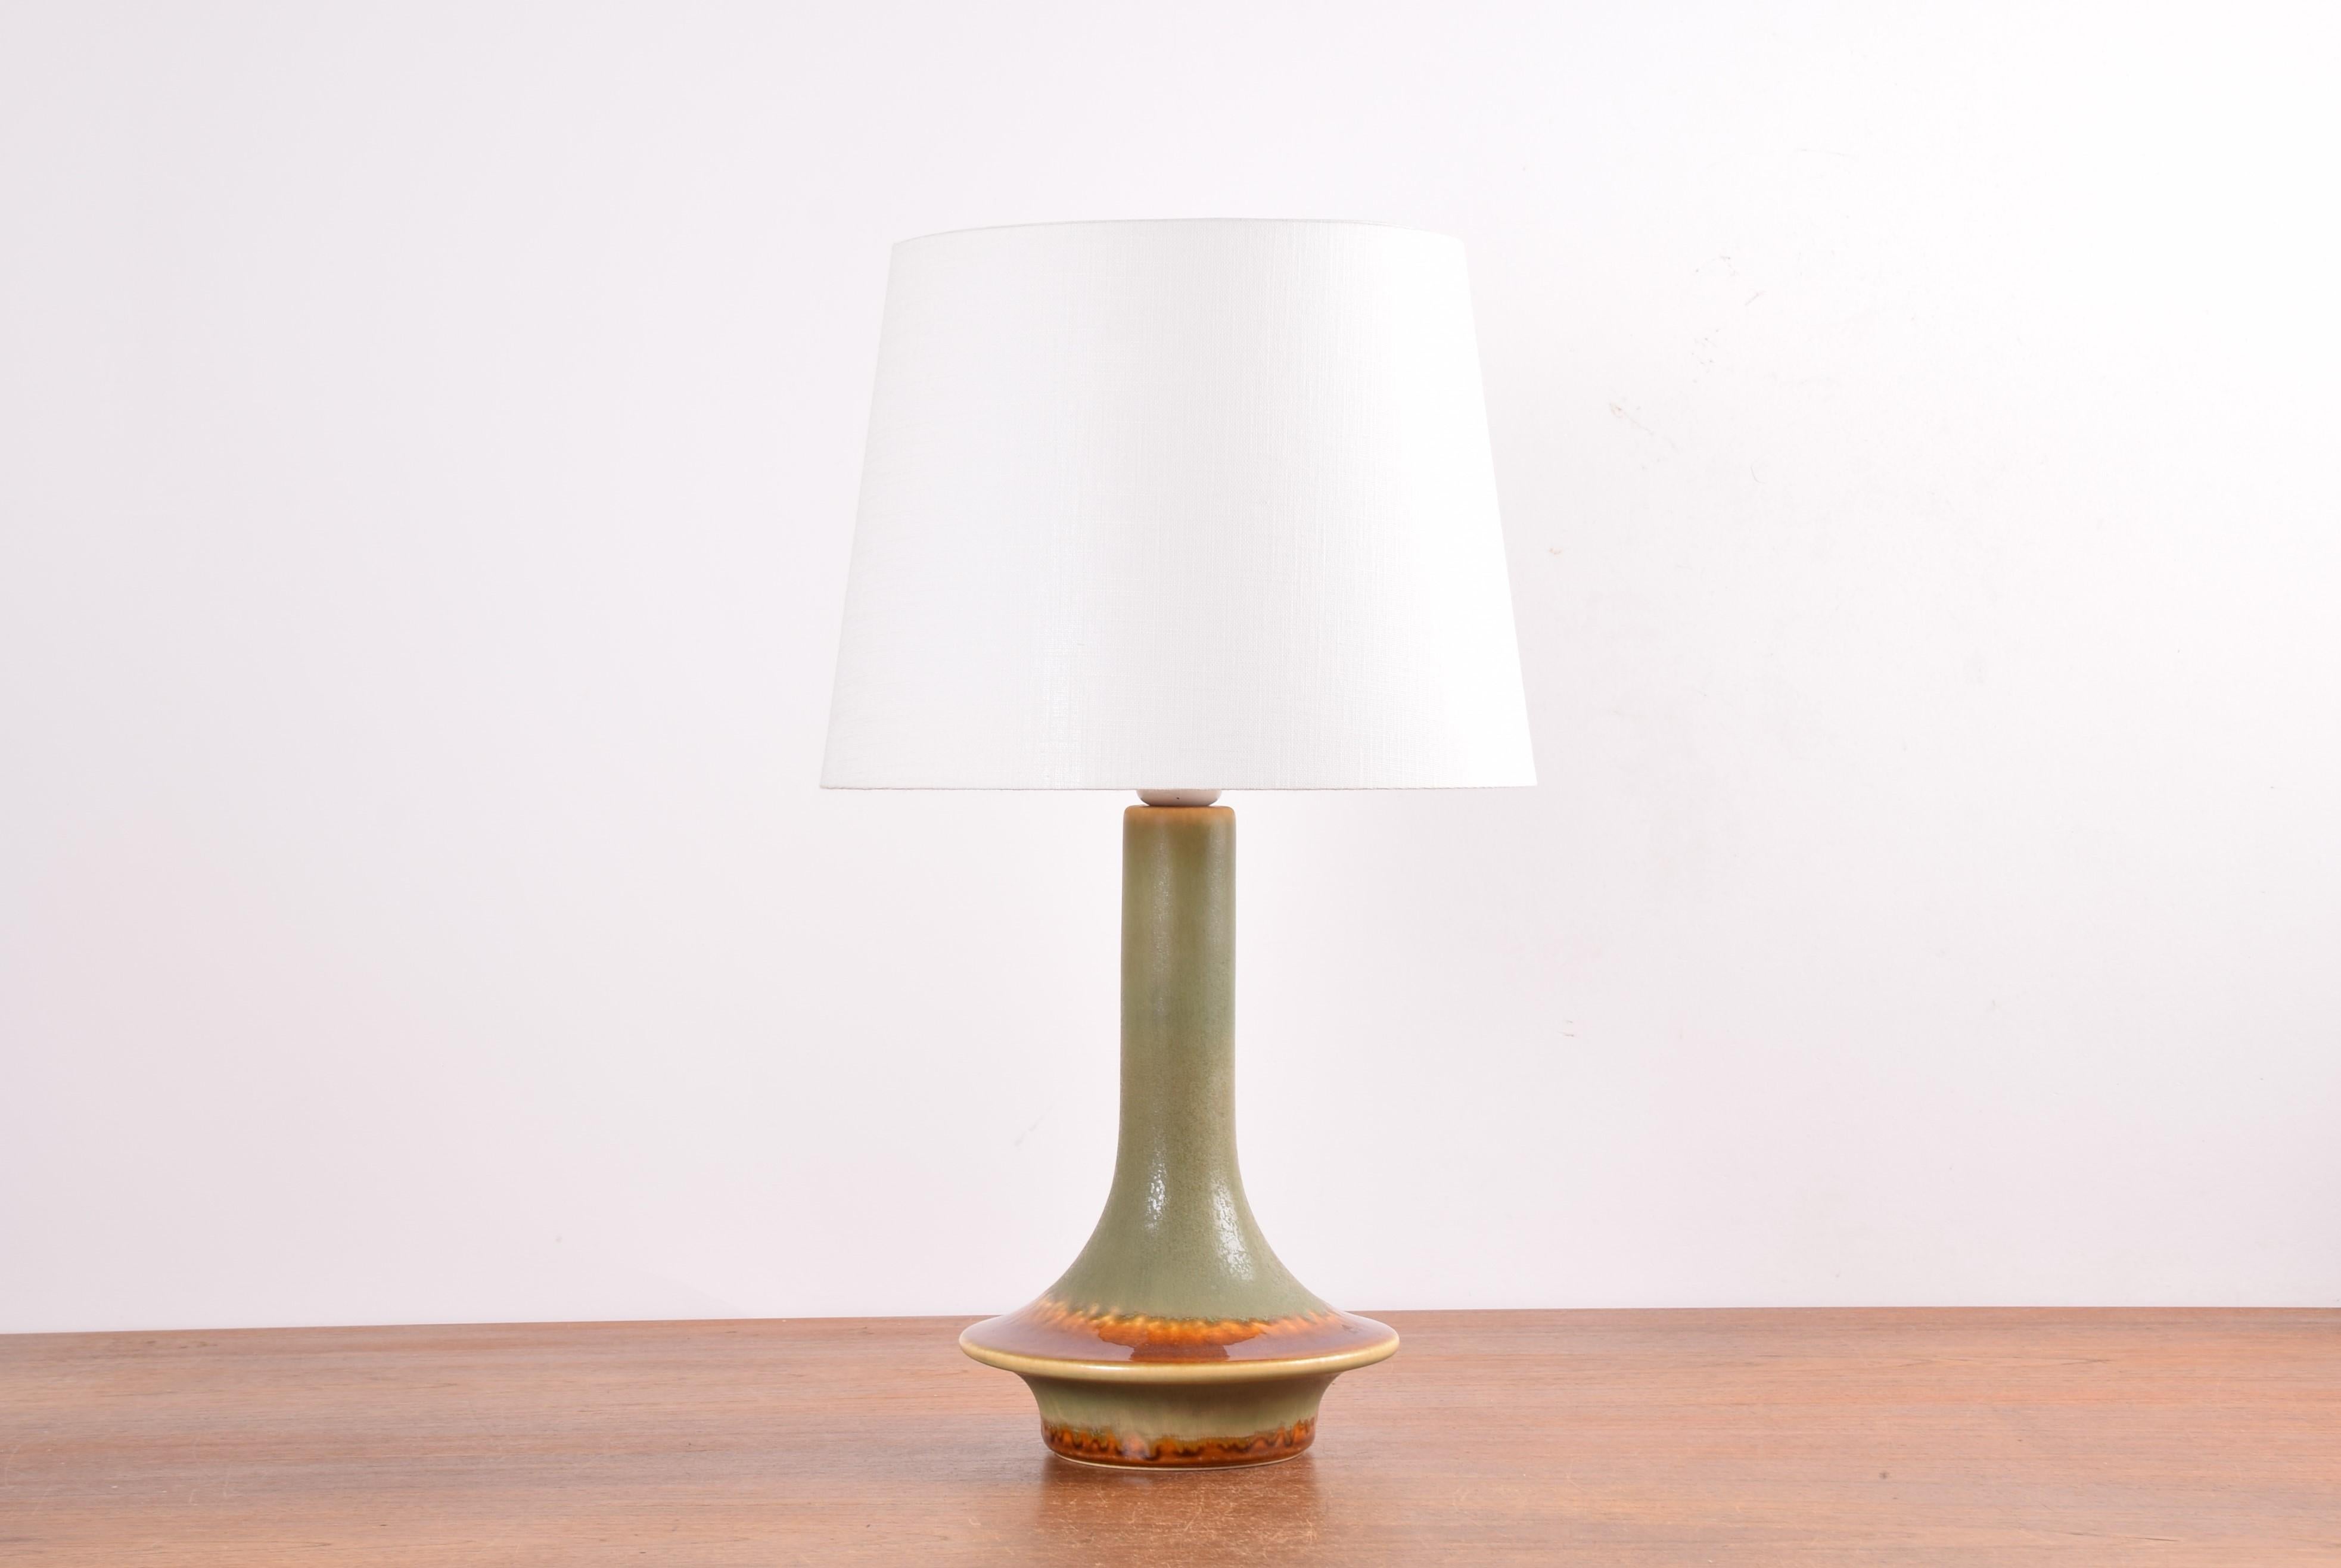 Midcentury Danish sculptural table lamp from Søholm Stentøj, Denmark, circa 1960s.
The lamp is decorated with a matte green glaze contrasted by a shiny running caramel brown glaze. 

Included is a new lamp shade designed and made in Denmark. It